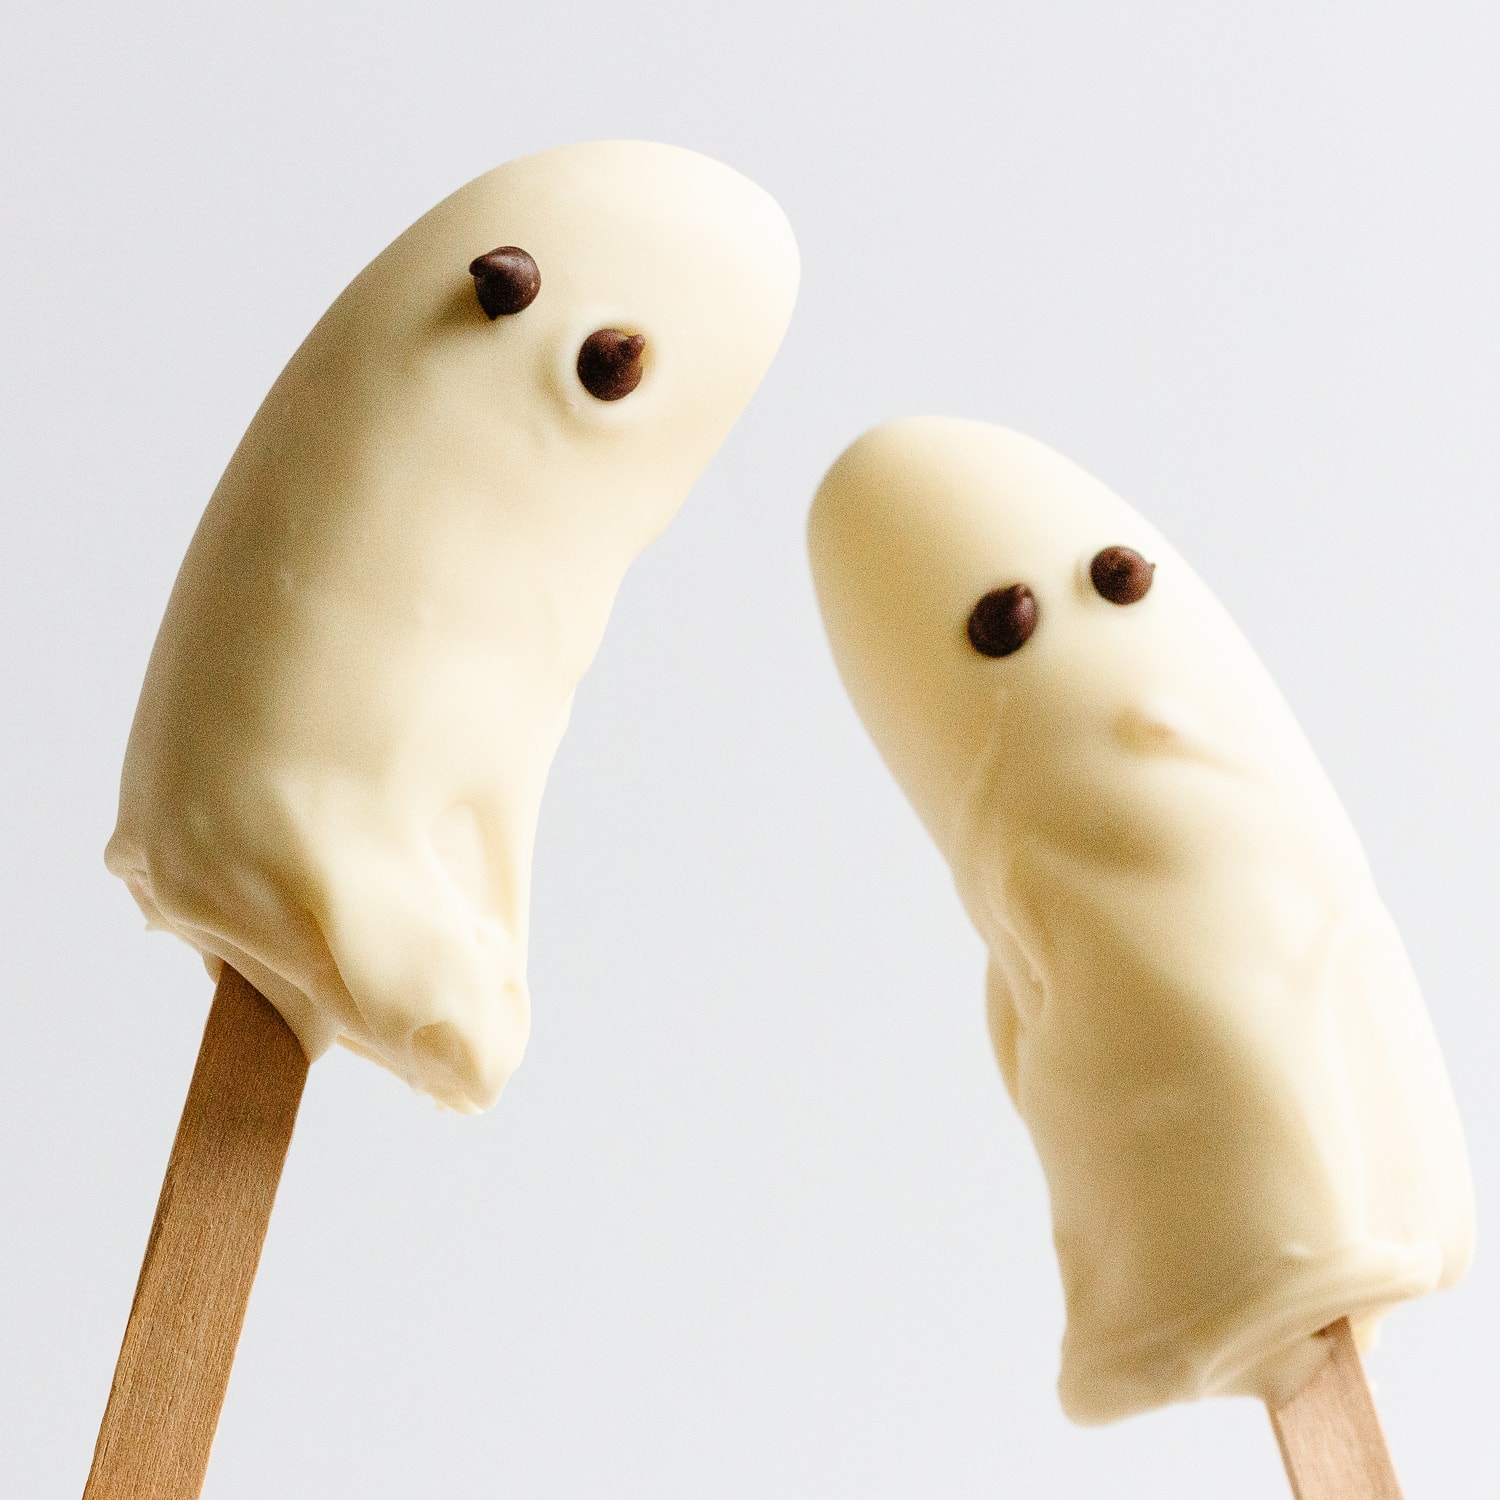 Two frozen ghost bananas covered in white chocolate with chocolate chip eyes.